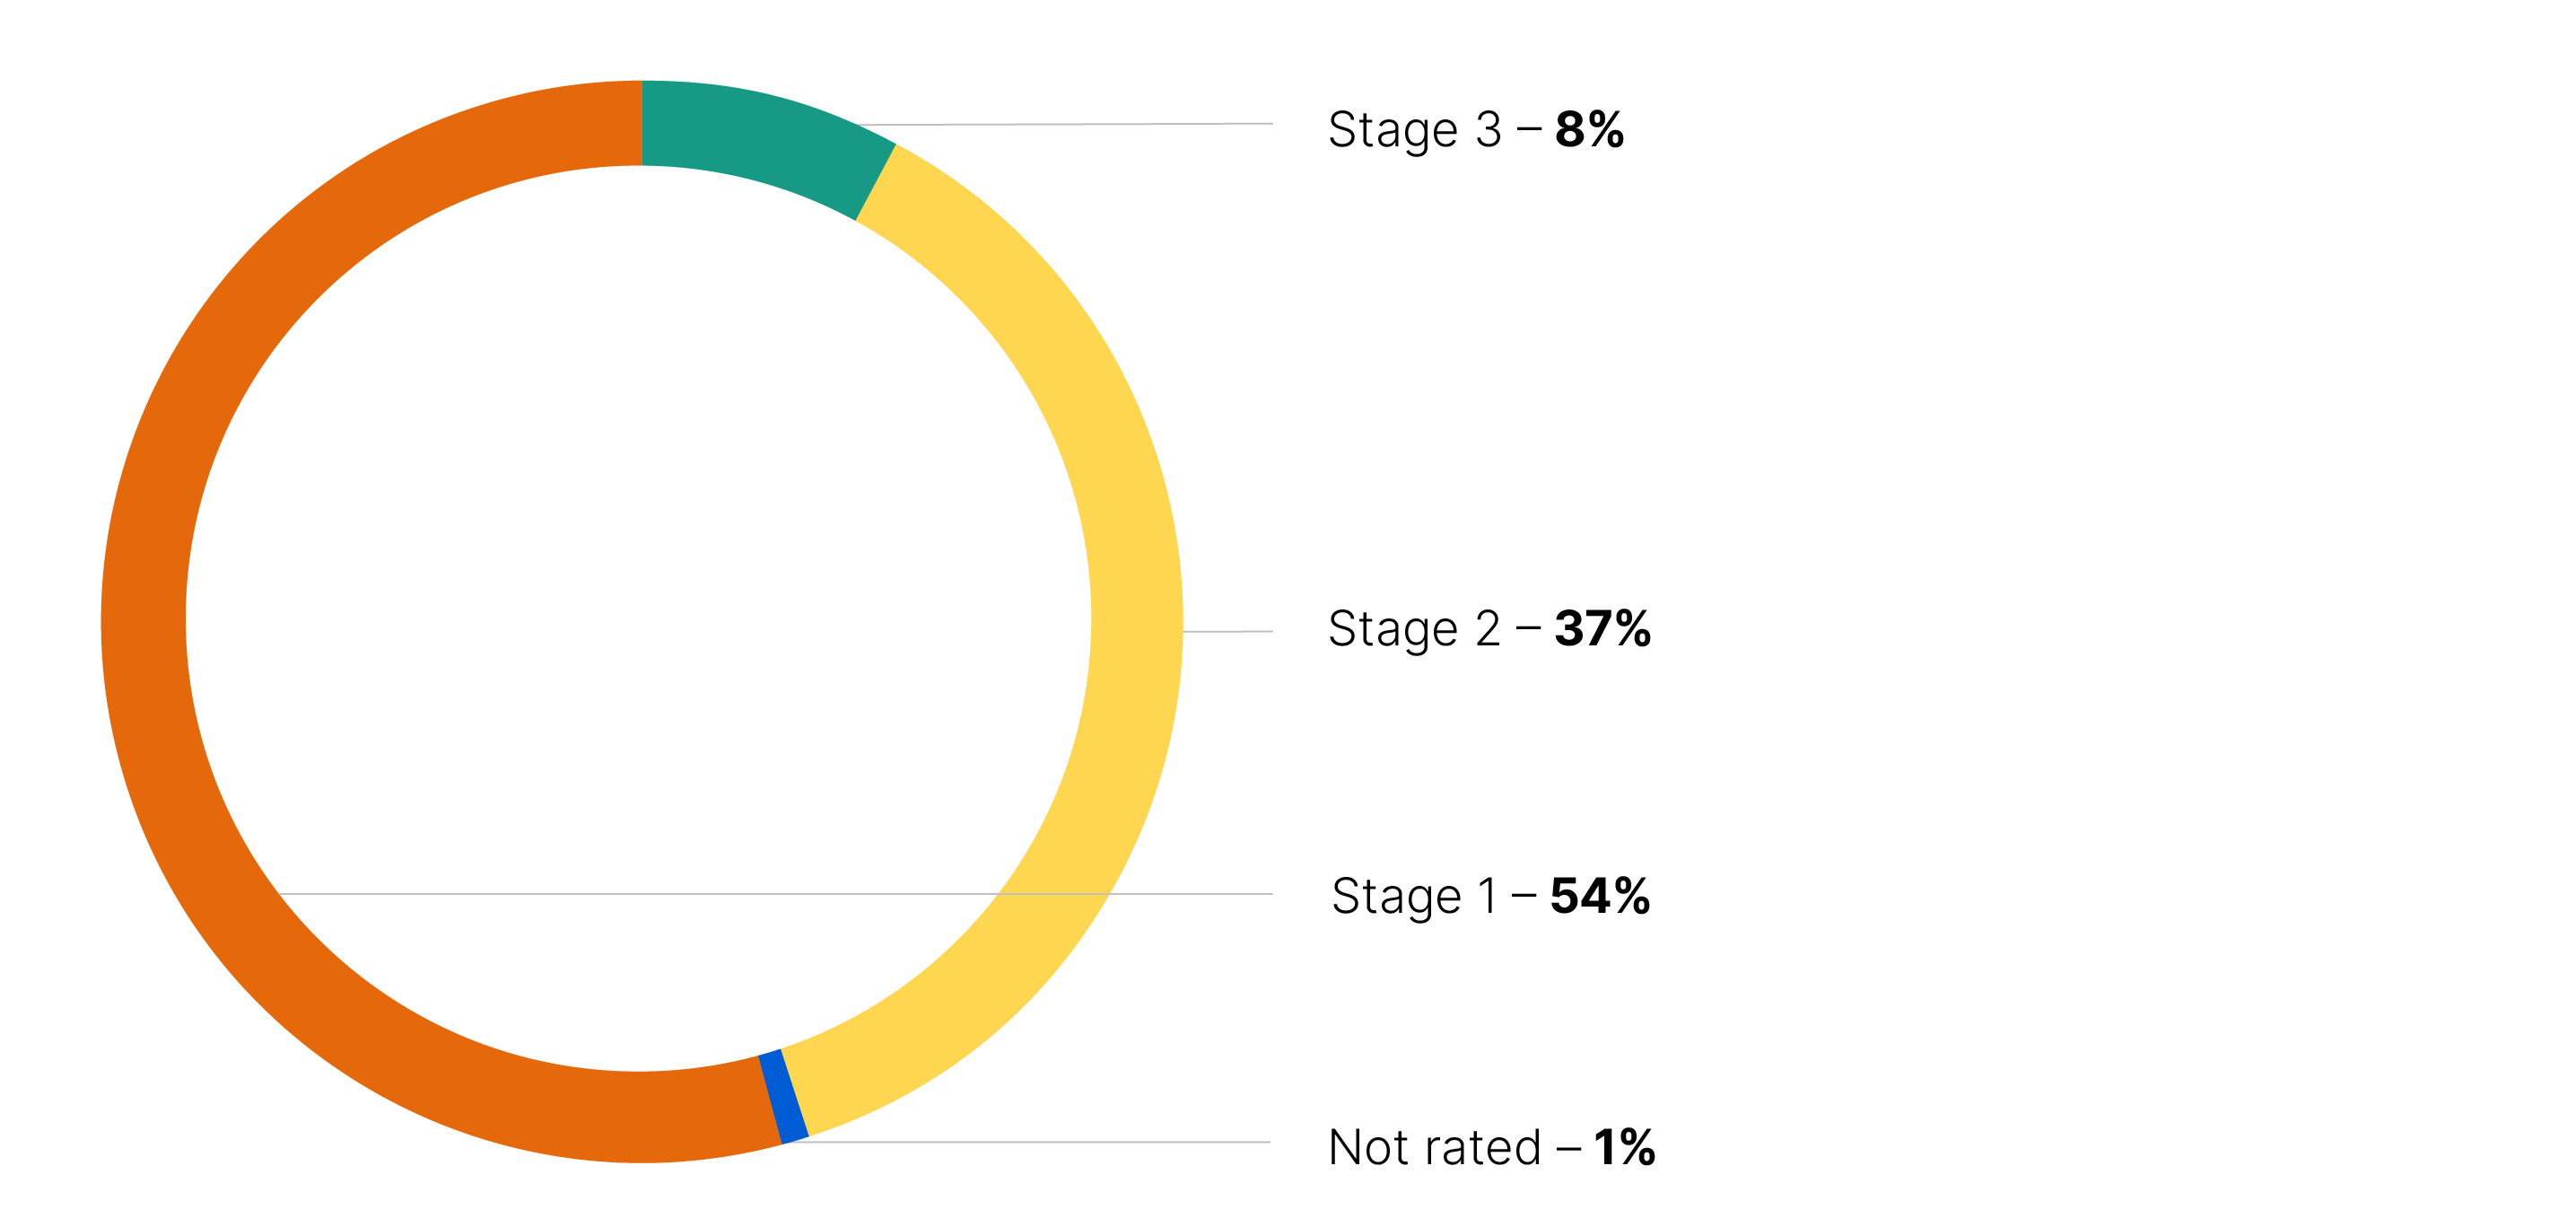 Pie graph showing percentage ratings, 8% stage 3, 37% stage 2, 54% stage 1, 1% not rated.